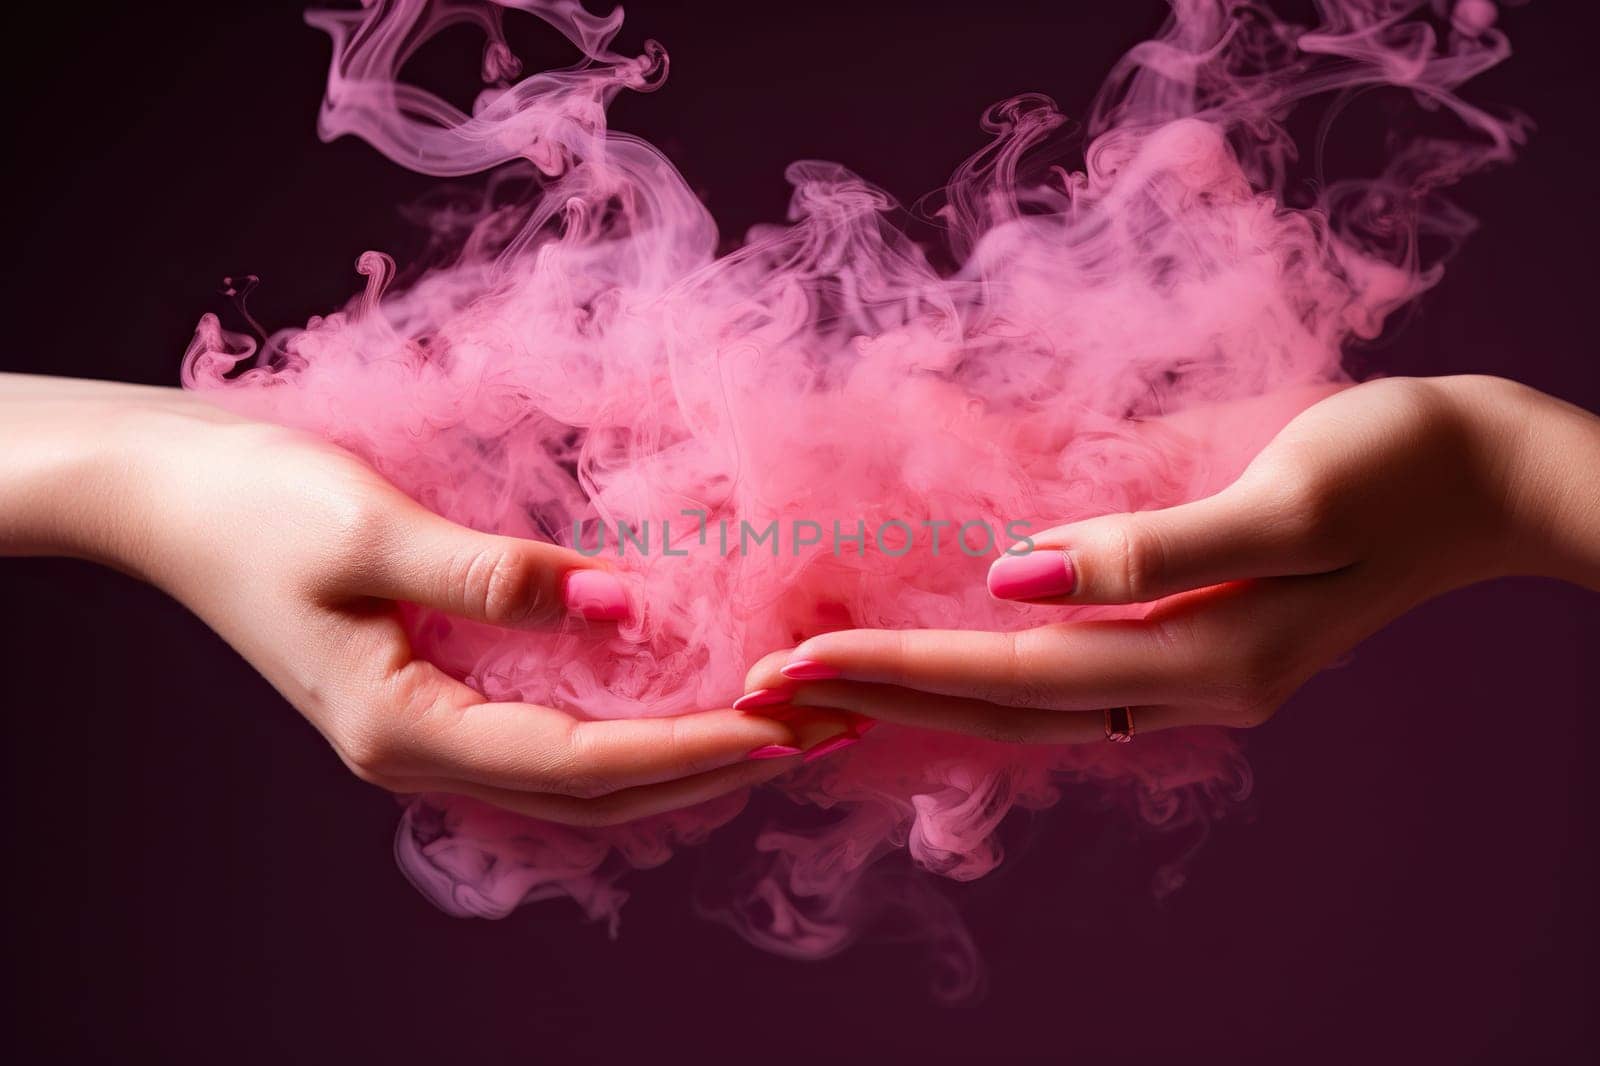 Two female hands connect in puffs of pink smoke on a dark background.